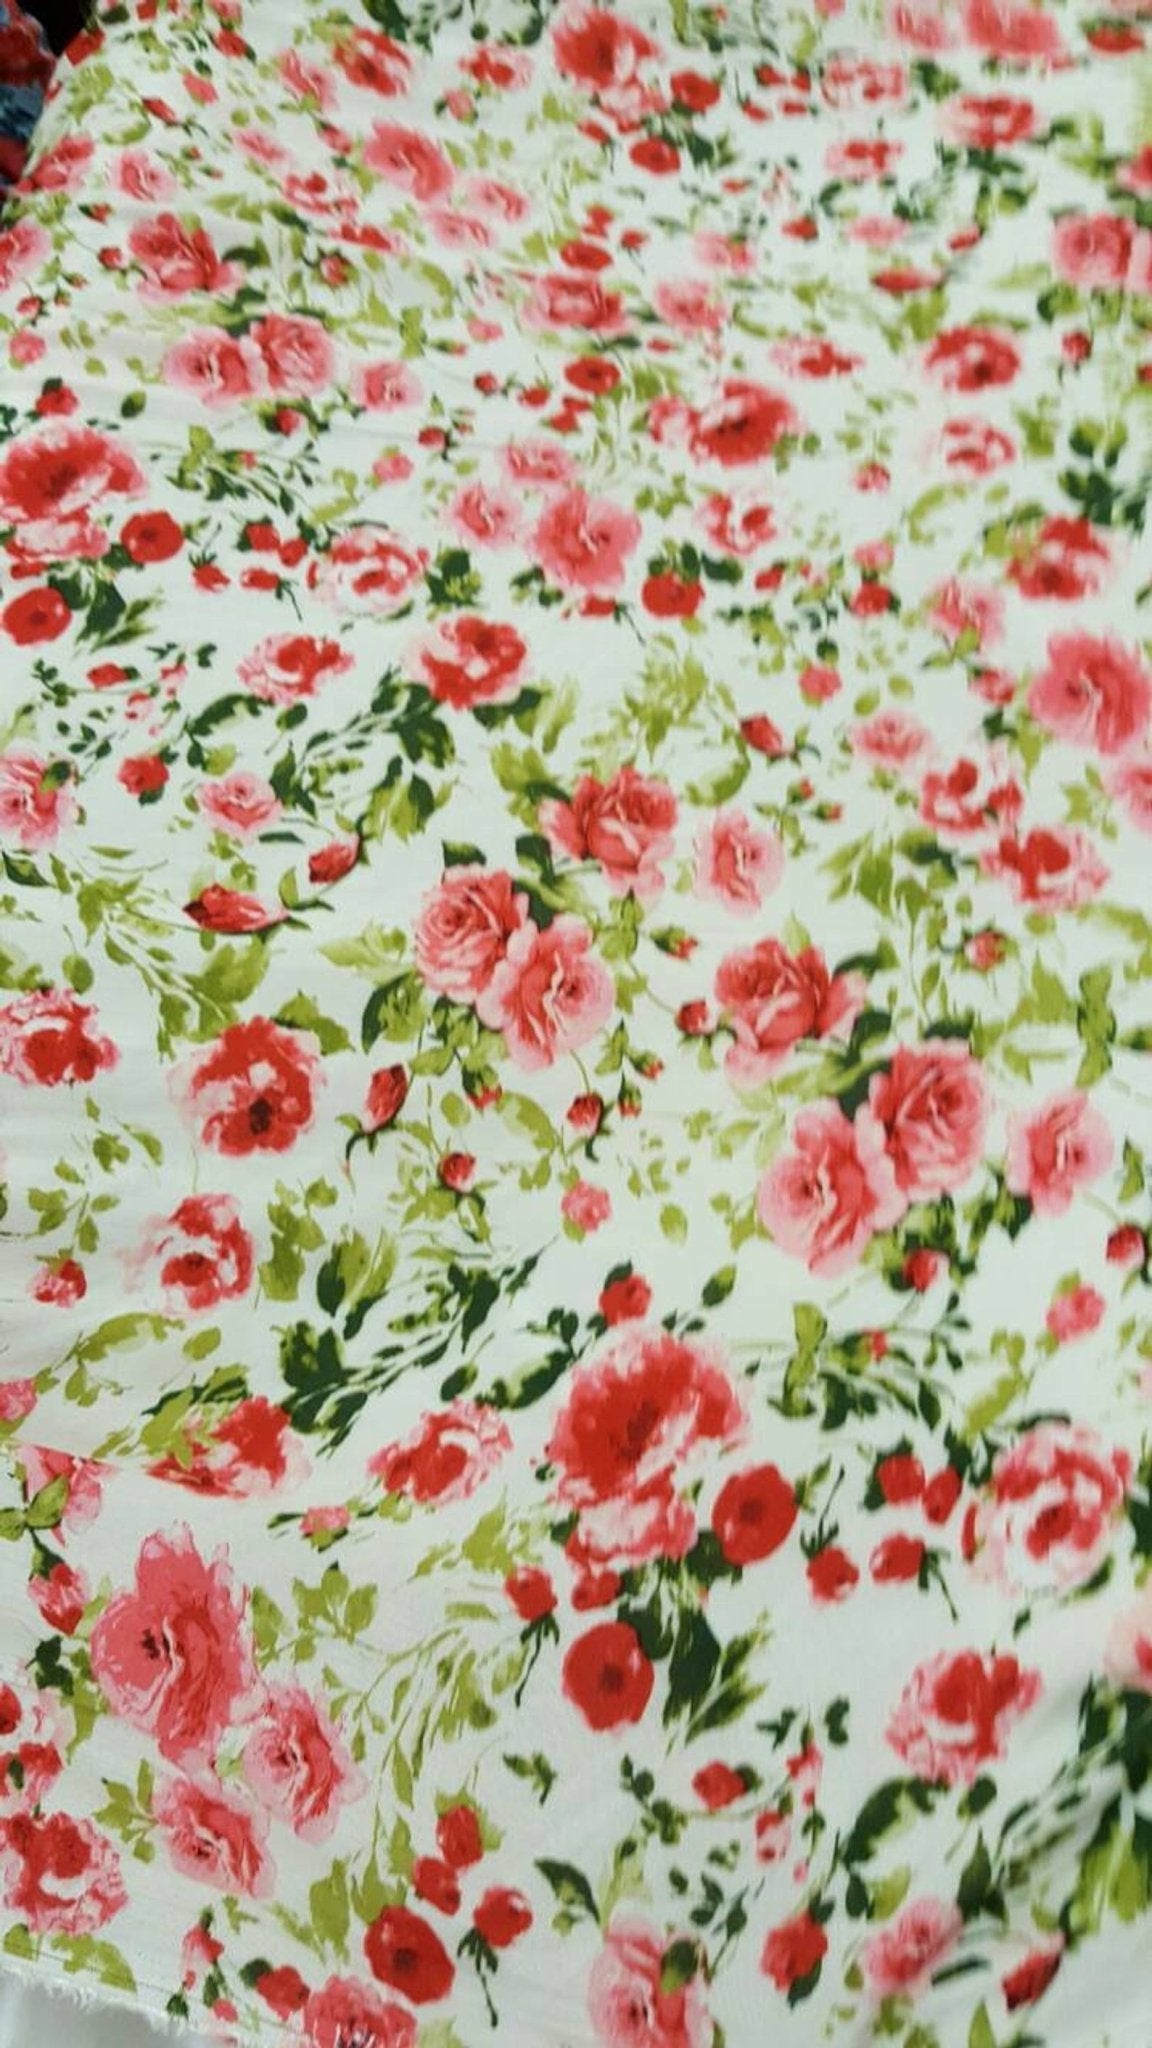 Rayon challis light pink and coral floral flowers off white background fabric sold by the yard crepe rayon flowy soft organic kids dressICE FABRICSICE FABRICS1Rayon challis light pink and coral floral flowers off white background fabric sold by the yard crepe rayon flowy soft organic kids dress ICE FABRICS